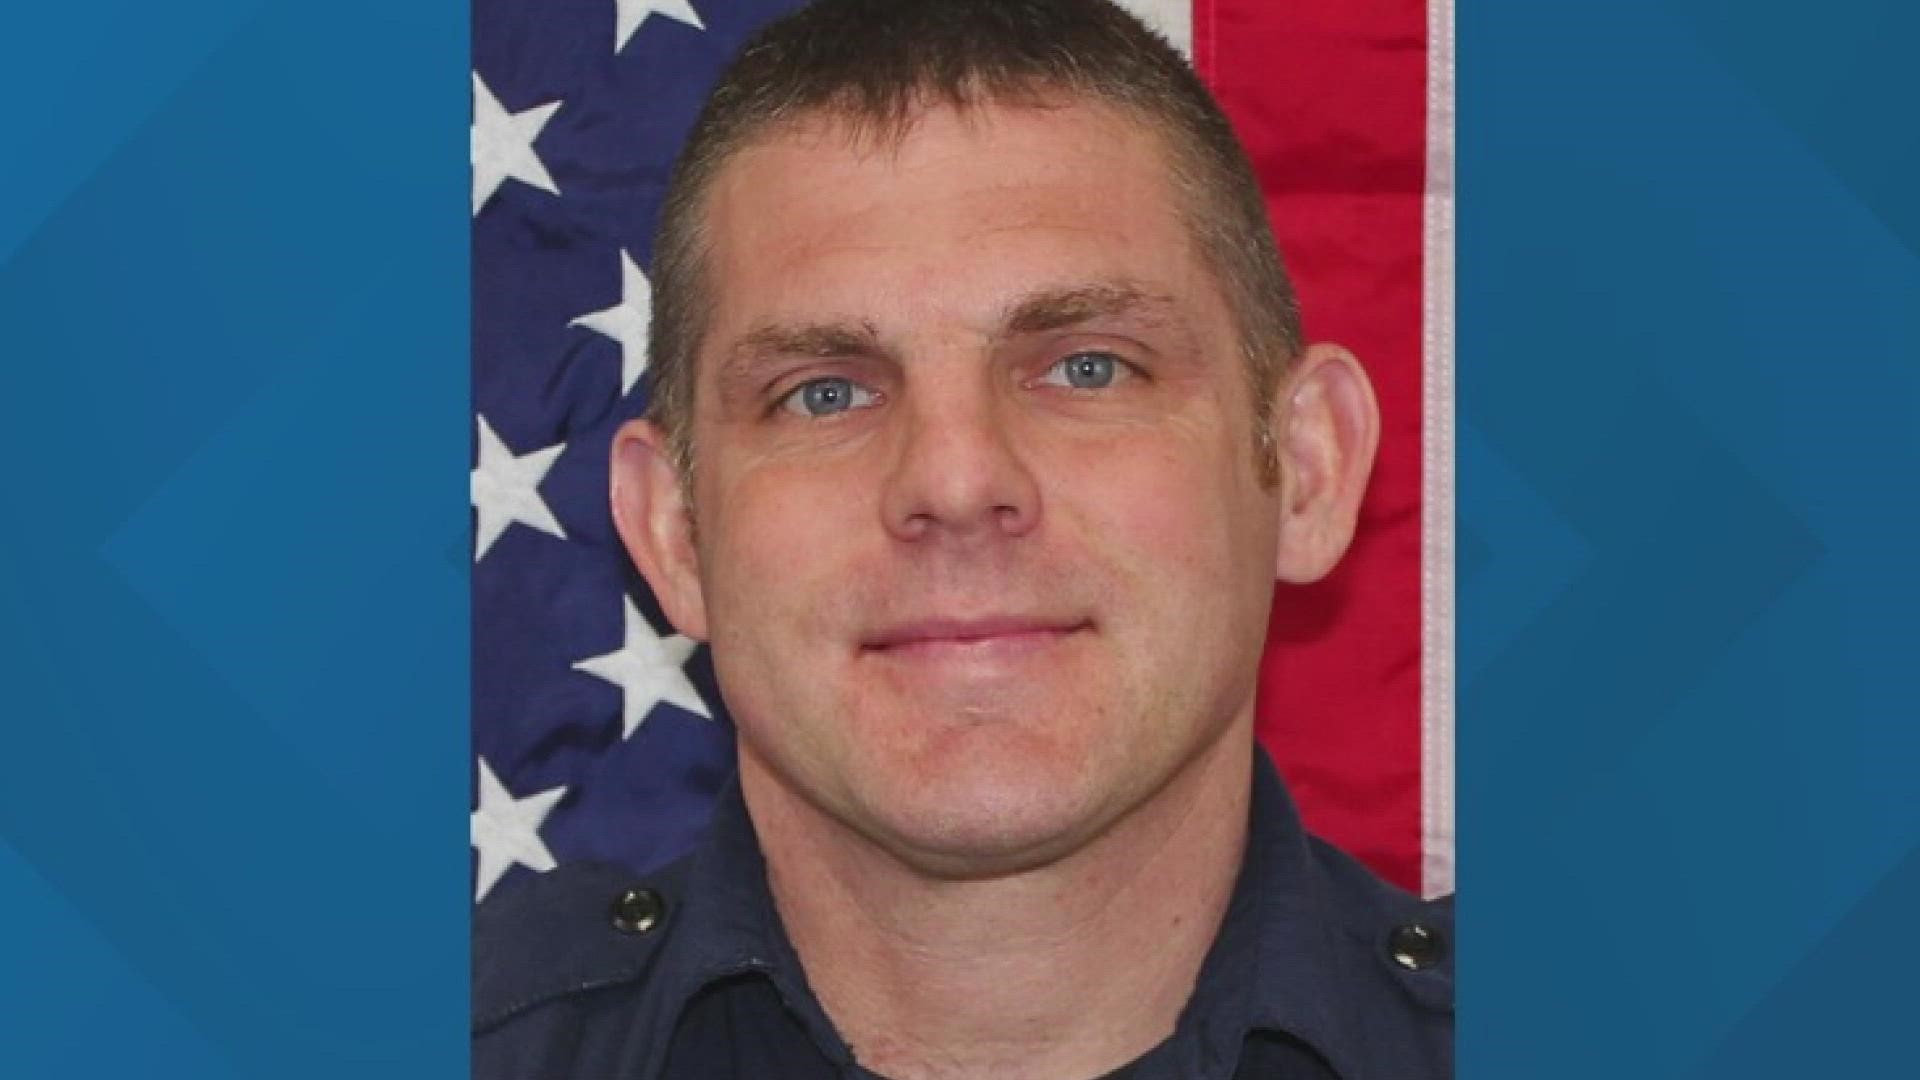 Spokane Valley firefighter Dan Patterson is in the ICU after suffering from a cardiac arrest while out of his shift.